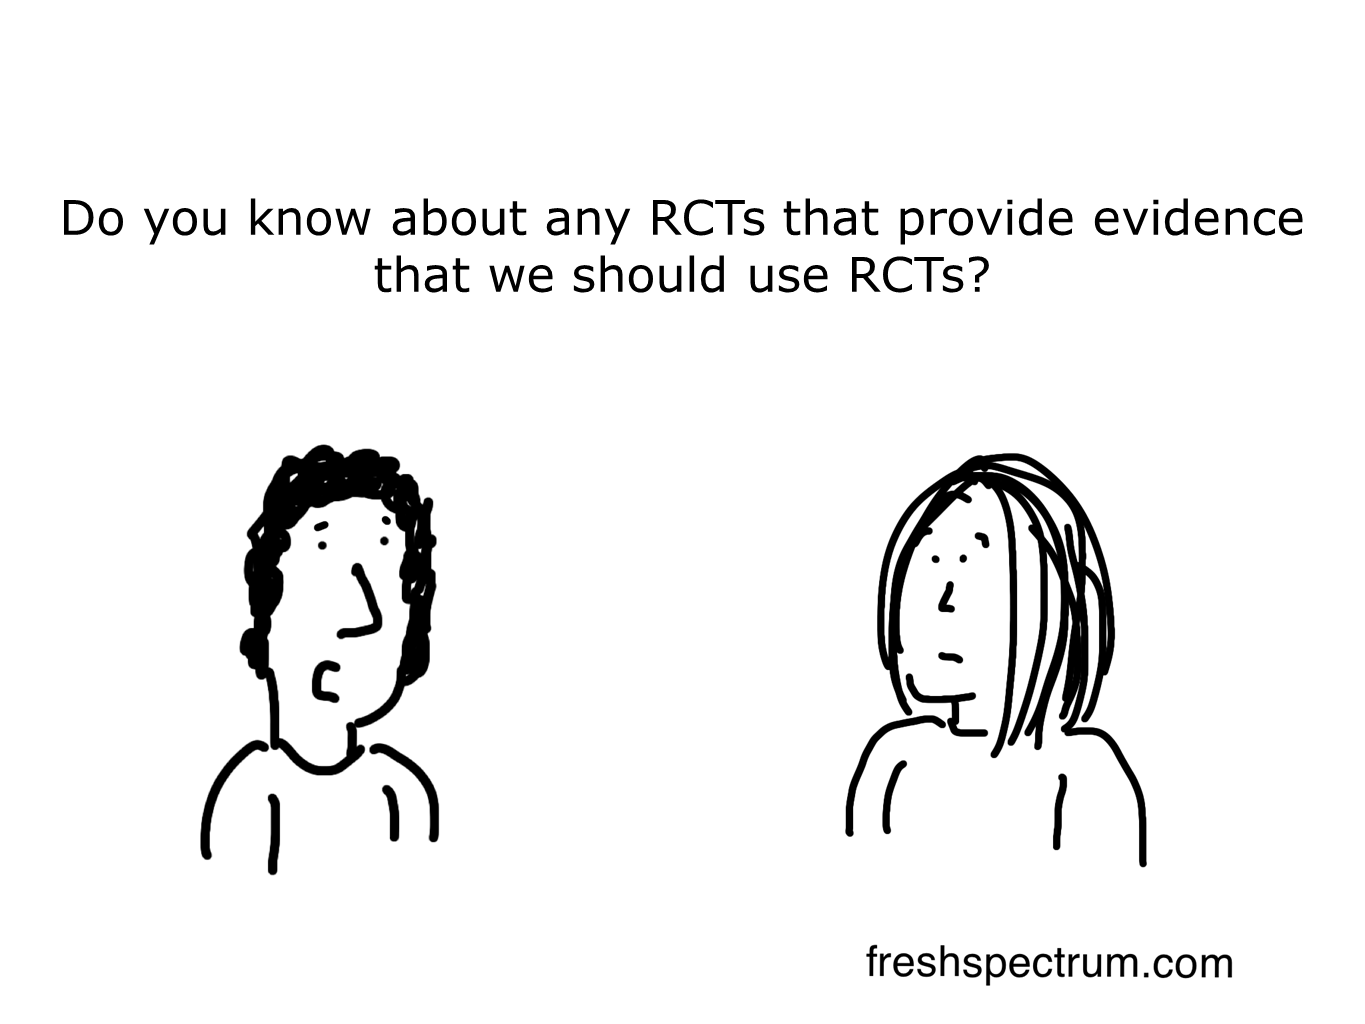 RCTs and the Status Quo: The Special Relationship